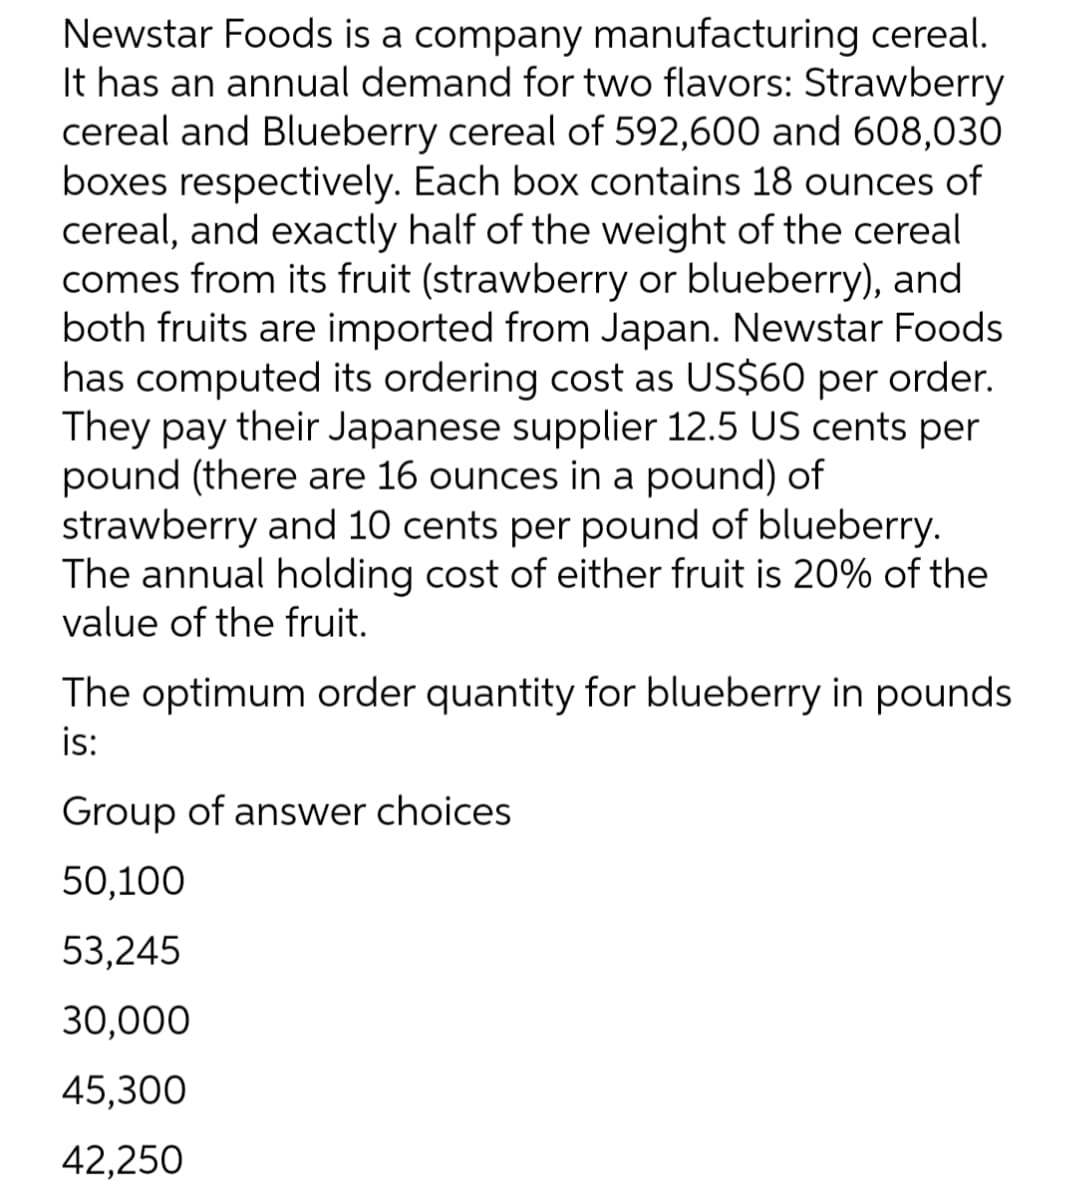 Newstar Foods is a company manufacturing cereal.
It has an annual demand for two flavors: Strawberry
cereal and Blueberry cereal of 592,600 and 608,030
boxes respectively. Each box contains 18 ounces of
cereal, and exactly half of the weight of the cereal
comes from its fruit (strawberry or blueberry), and
both fruits are imported from Japan. Newstar Foods
has computed its ordering cost as US$60 per order.
They pay their Japanese supplier 12.5 US cents per
pound (there are 16 ounces in a pound) of
strawberry and 10 cents per pound of blueberry.
The annual holding cost of either fruit is 20% of the
value of the fruit.
The optimum order quantity for blueberry in pounds
is:
Group of answer choices
50,100
53,245
30,000
45,300
42,250
